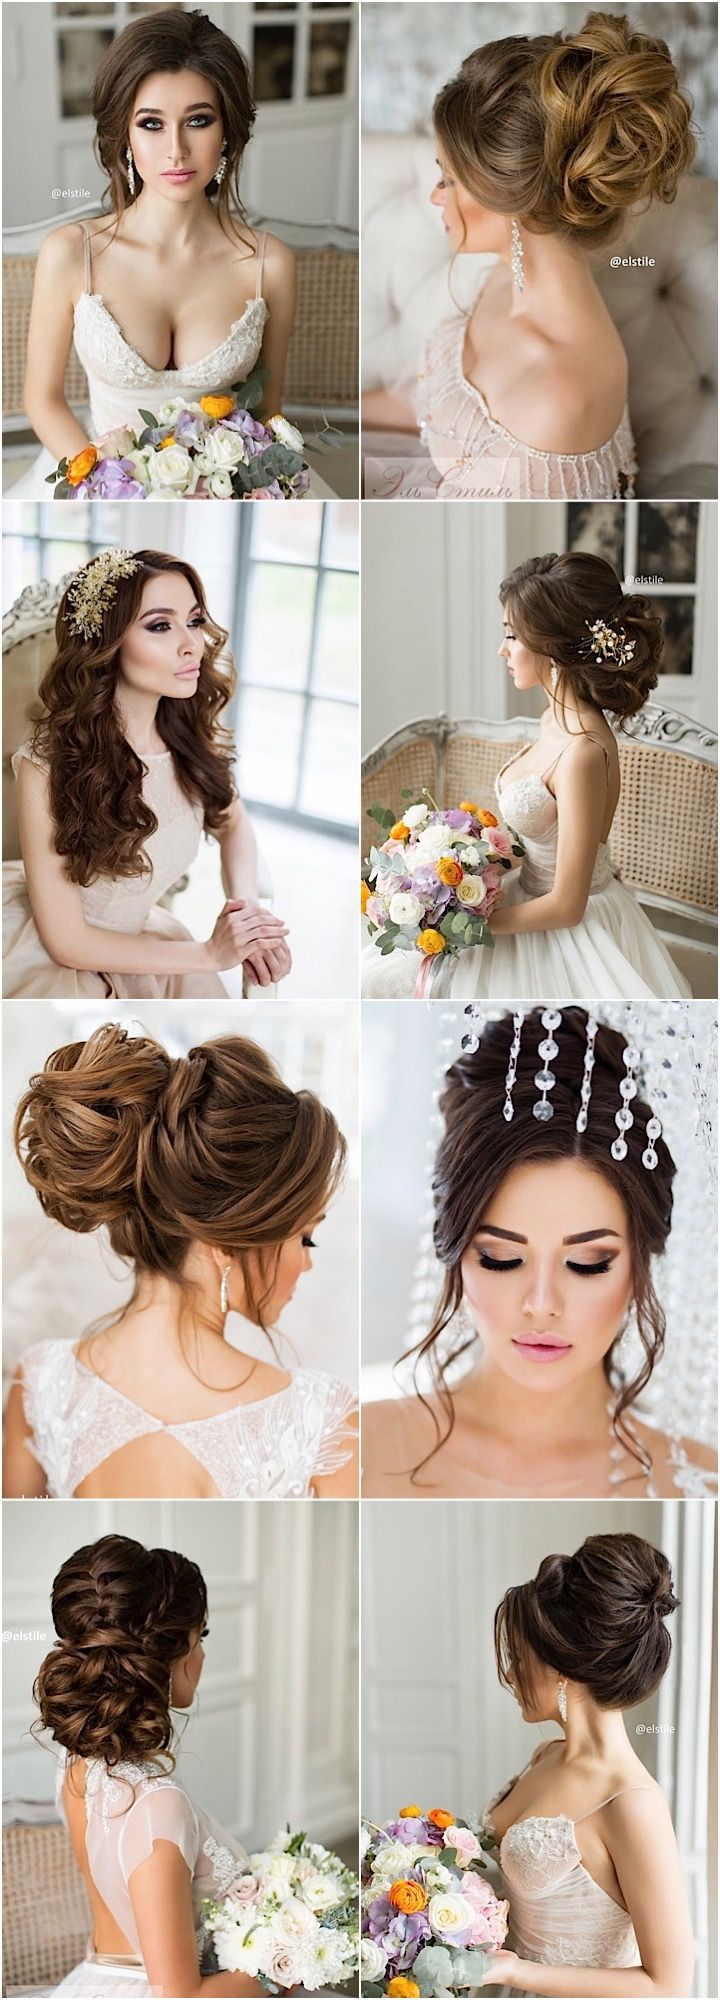 18 Wedding Updo Hairstyles That Are Beautiful From Every Angle